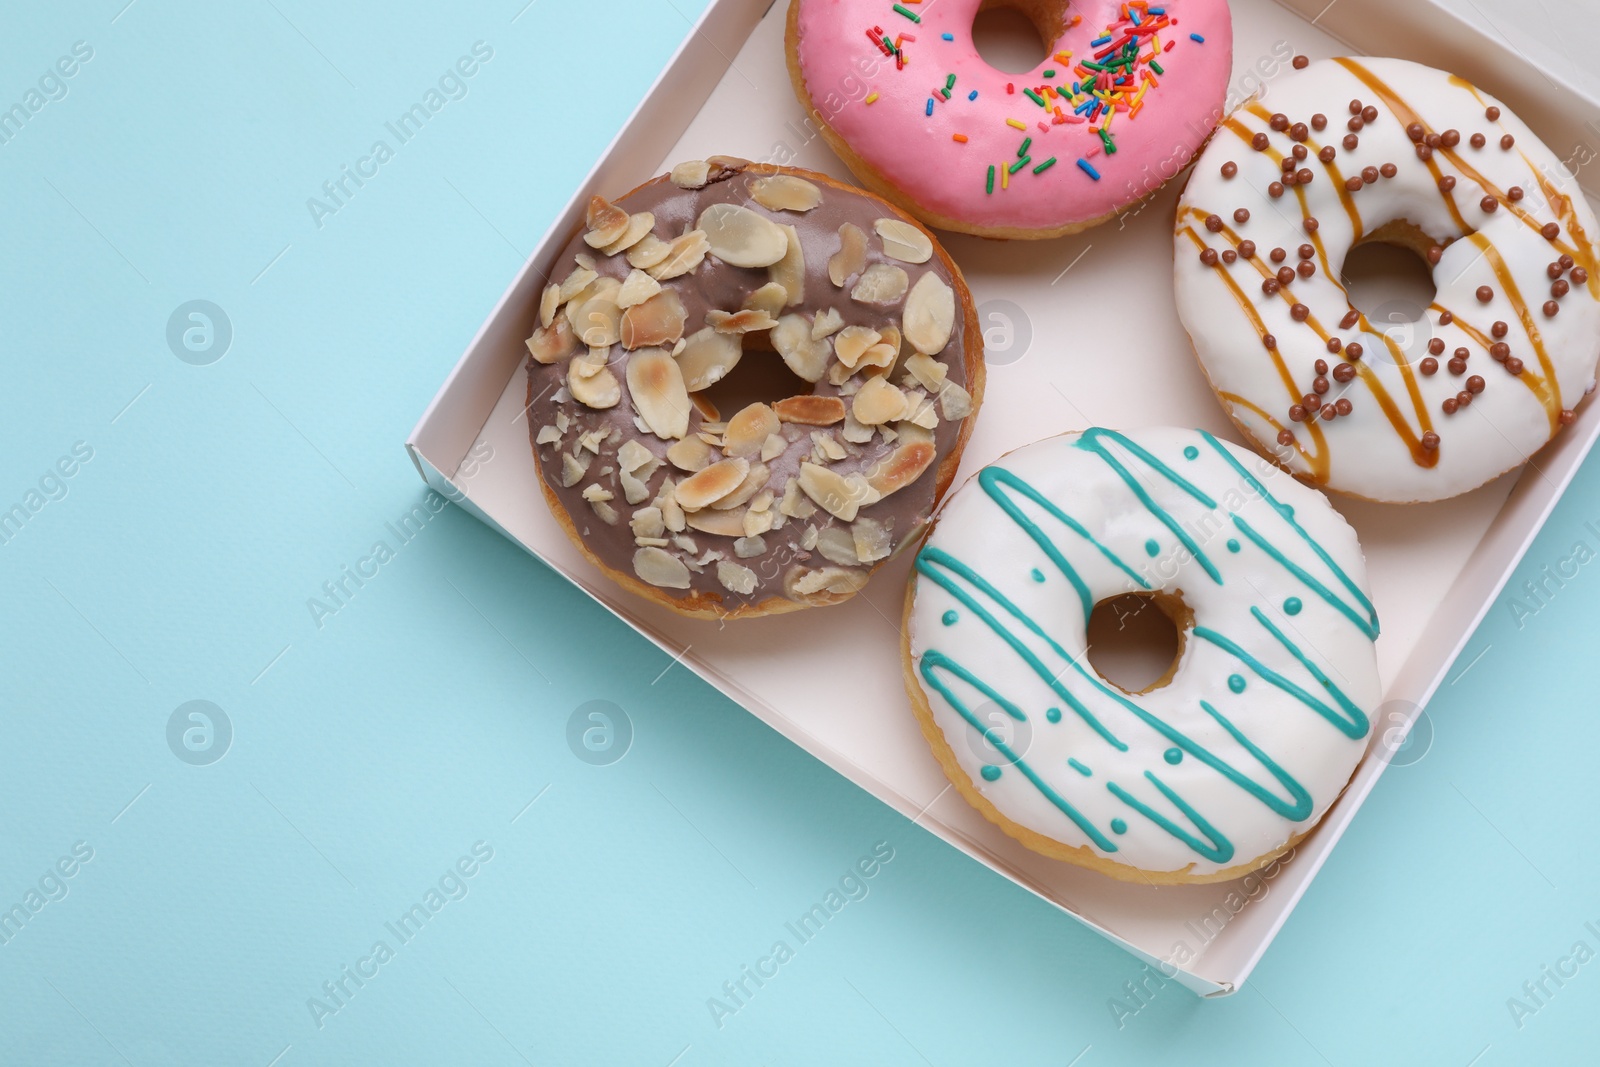 Photo of Box with different tasty glazed donuts on light blue background, top view